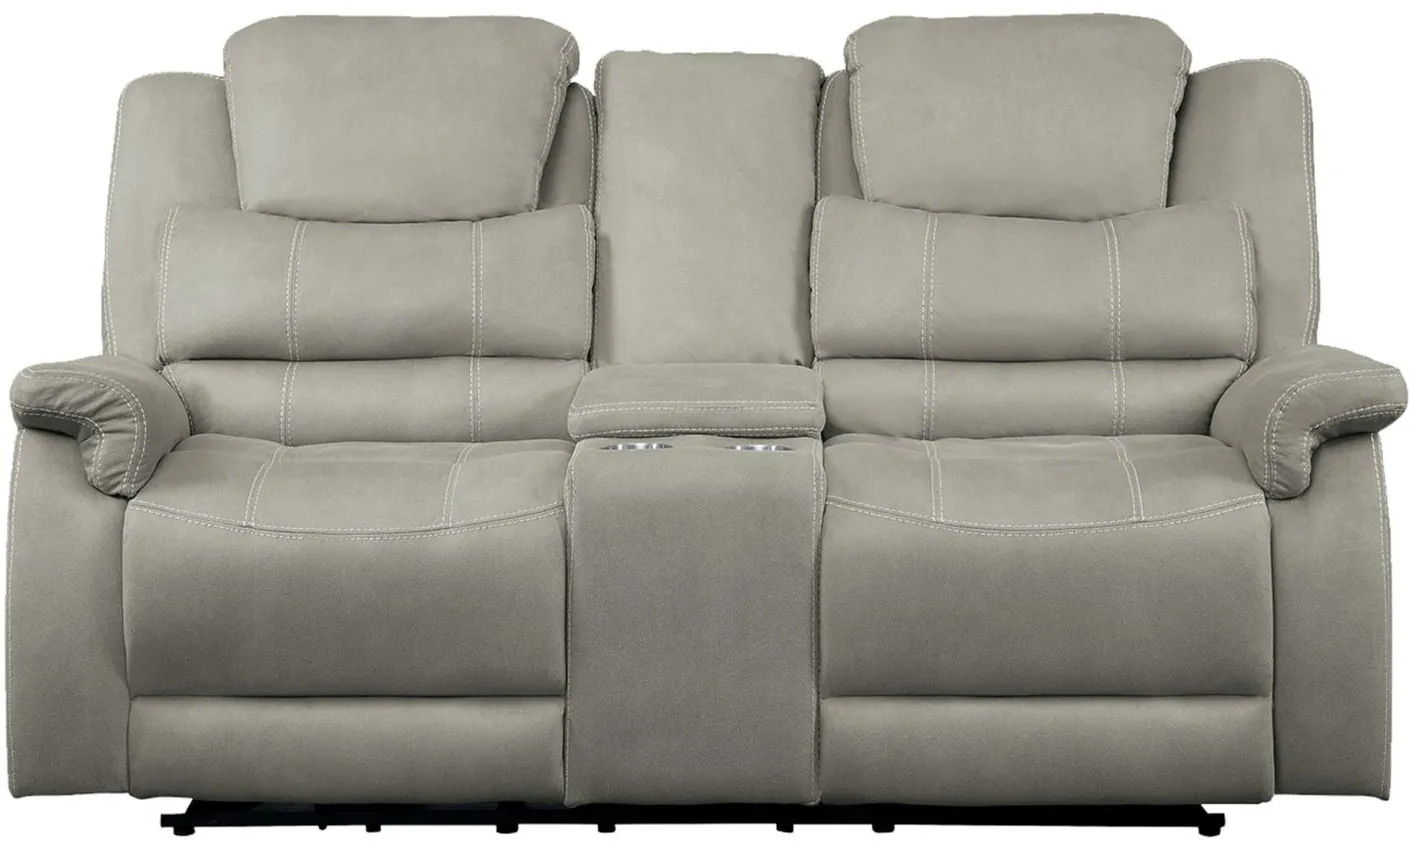 Prose Reclining Console Loveseat in Gray by Homelegance